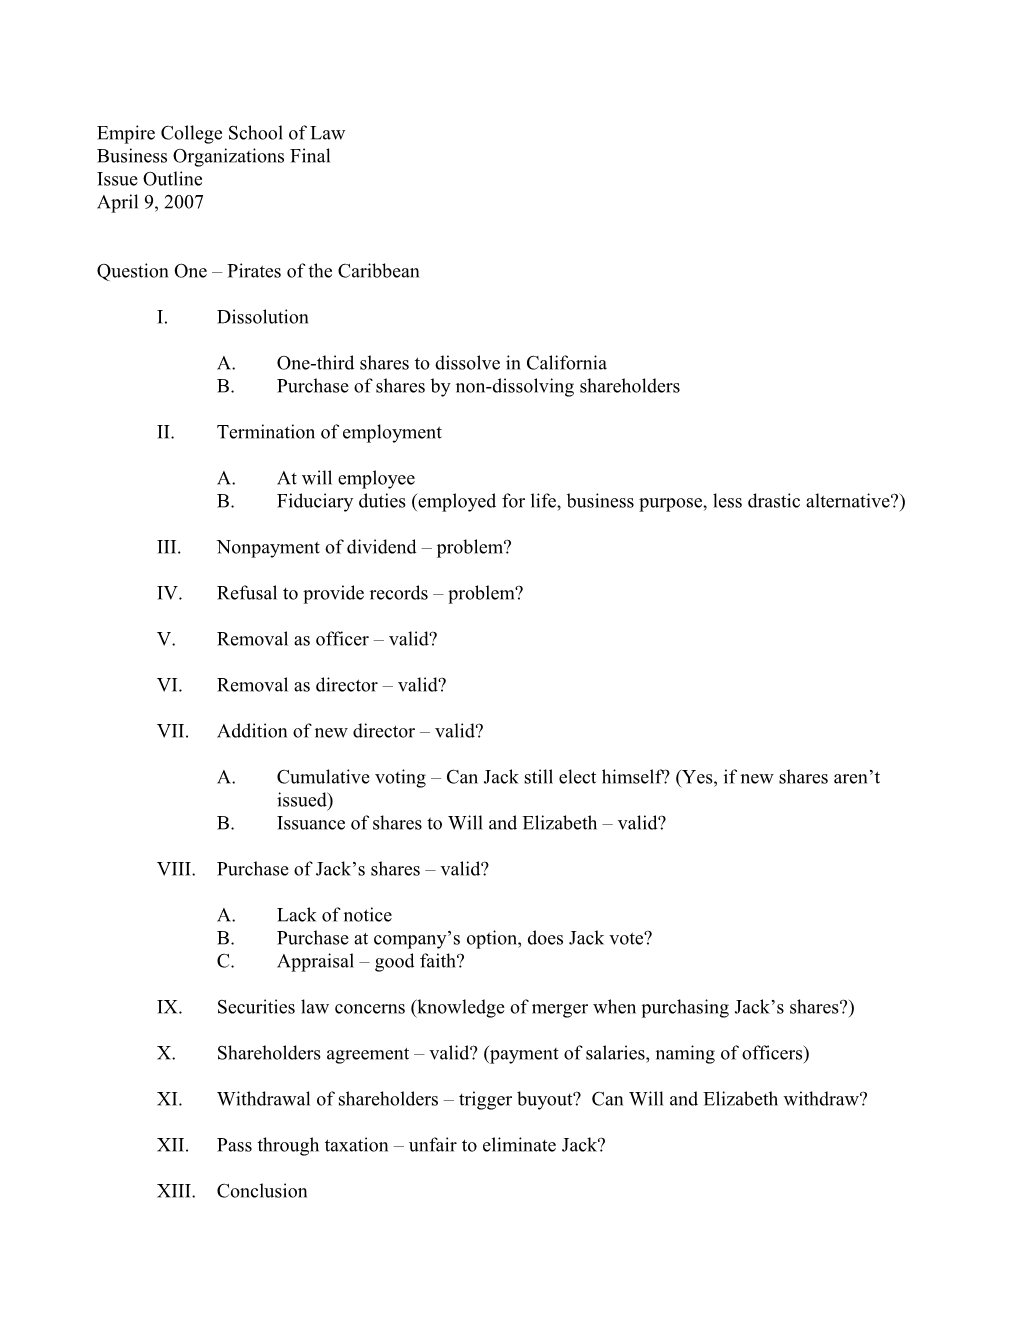 2007 Business Orgs Spring 15 Final Issue Outline (00044257)